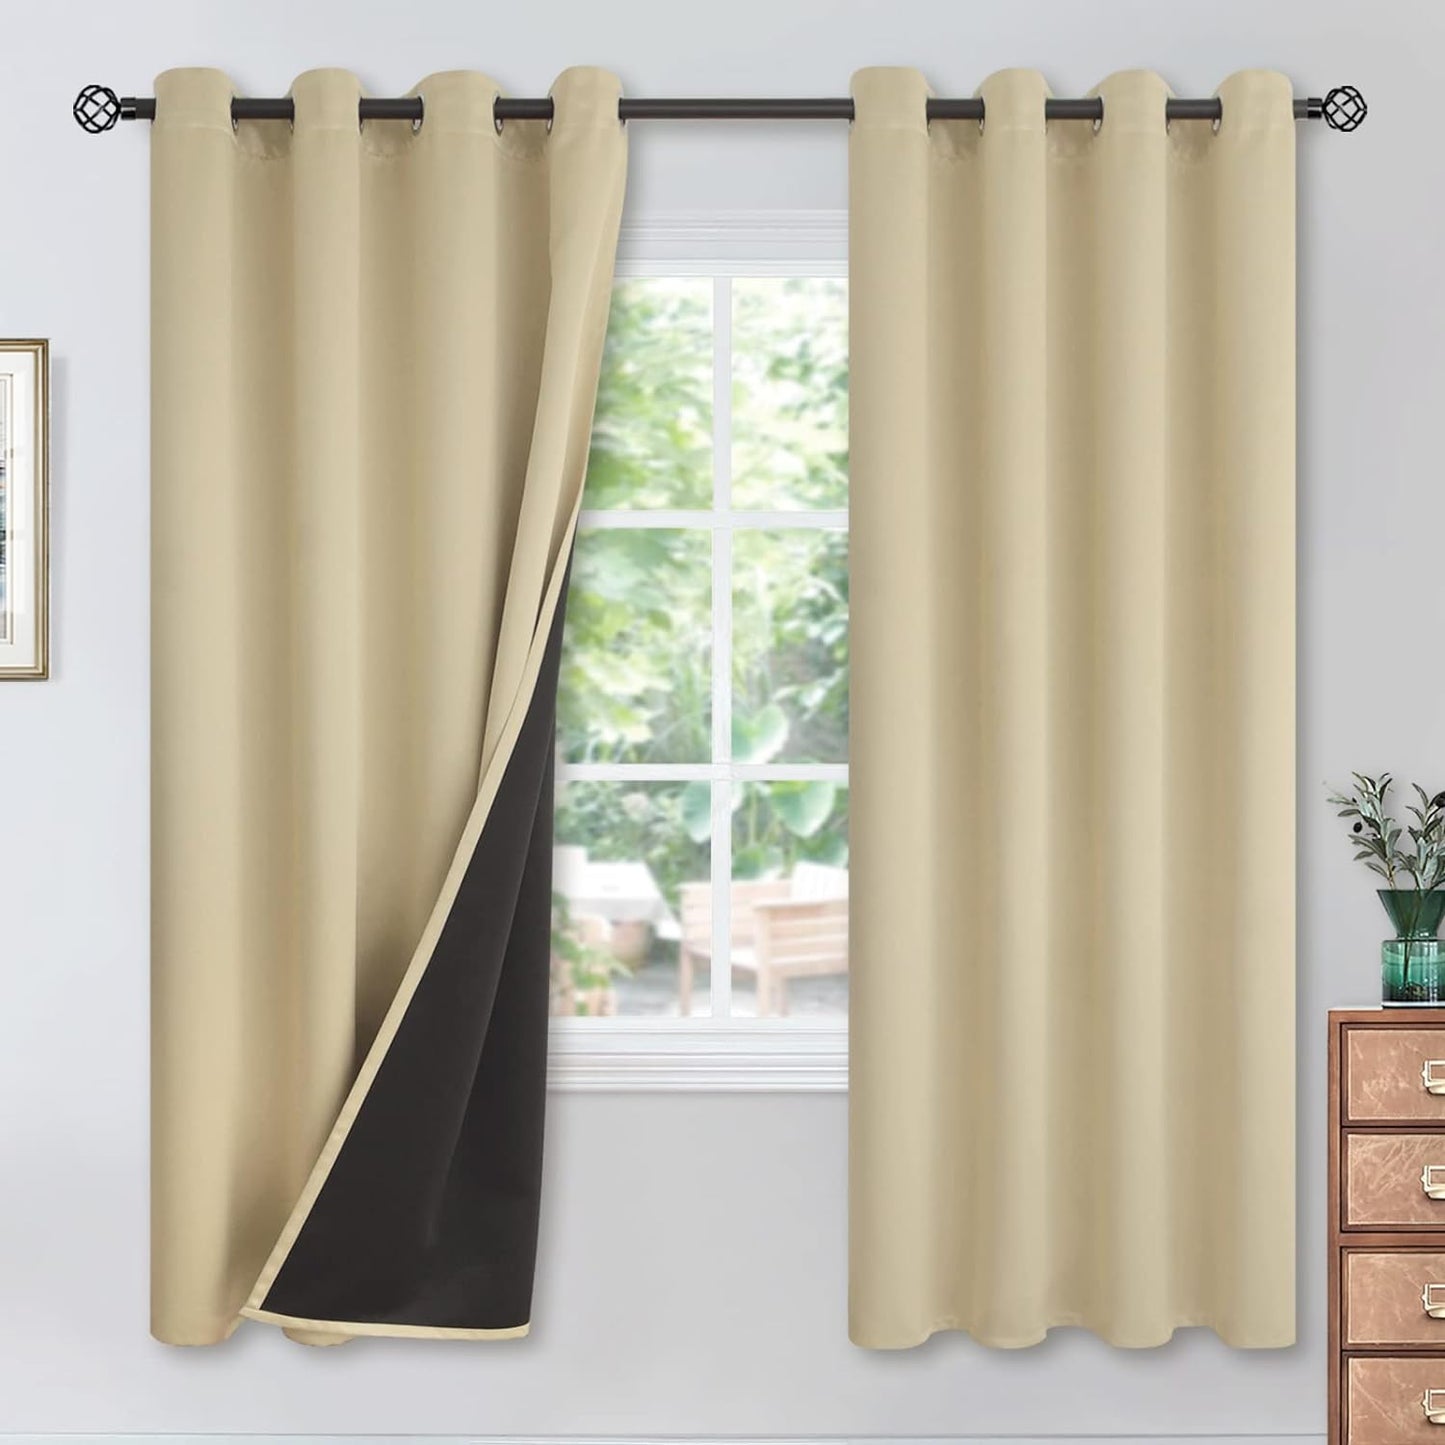 Youngstex Black 100% Blackout Curtains 63 Inches for Bedroom Thermal Insulated Total Room Darkening Curtains for Living Room Window with Black Back Grommet, 2 Panels, 42 X 63 Inch  YoungsTex Beige 52W X 72L 